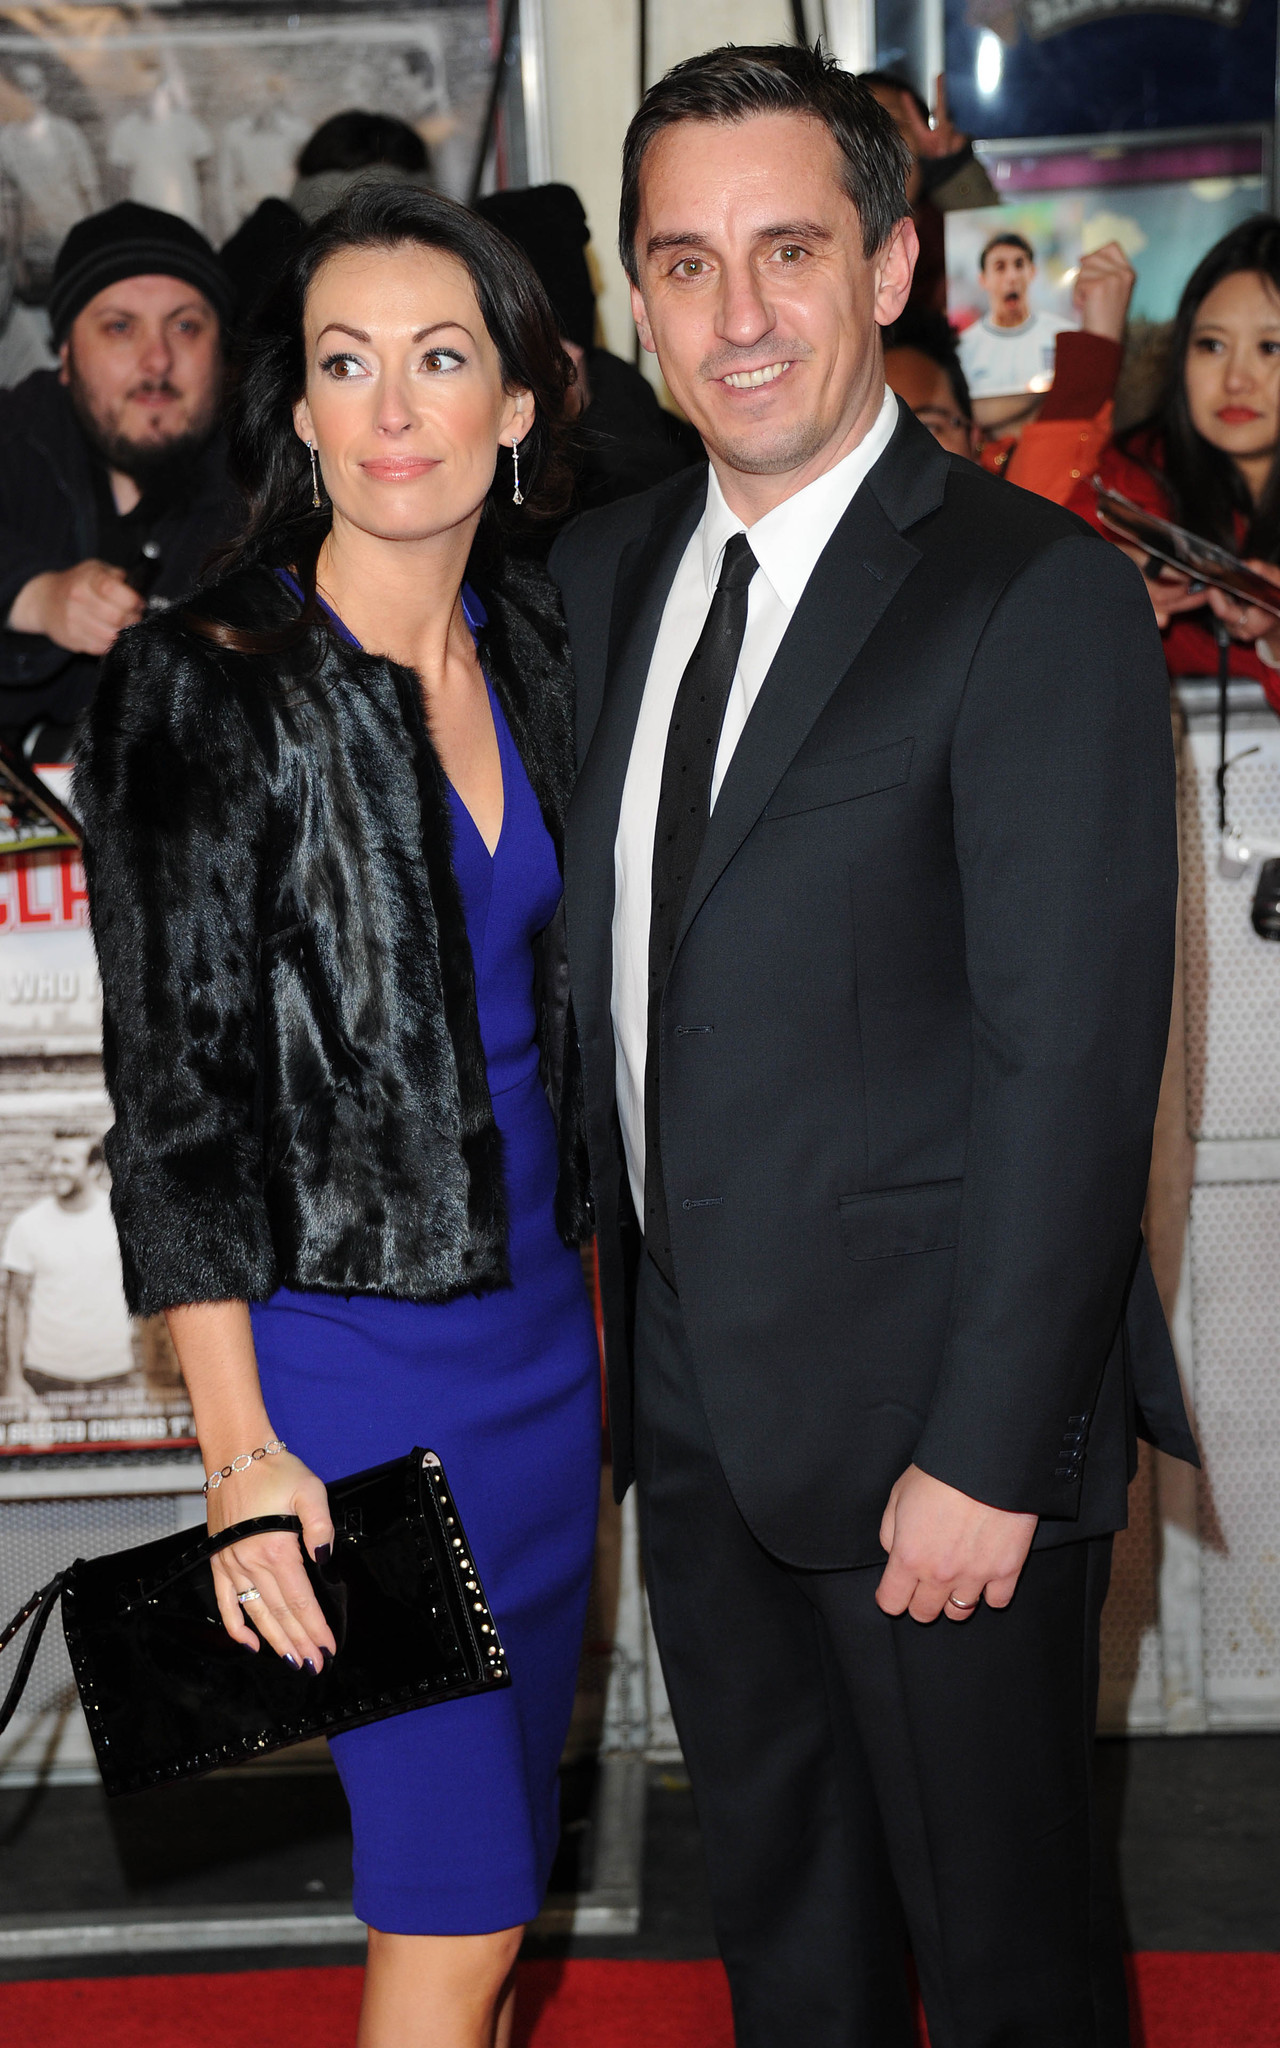 Gary Neville and Emma Hadfield at event of The Class of 92 (2013)